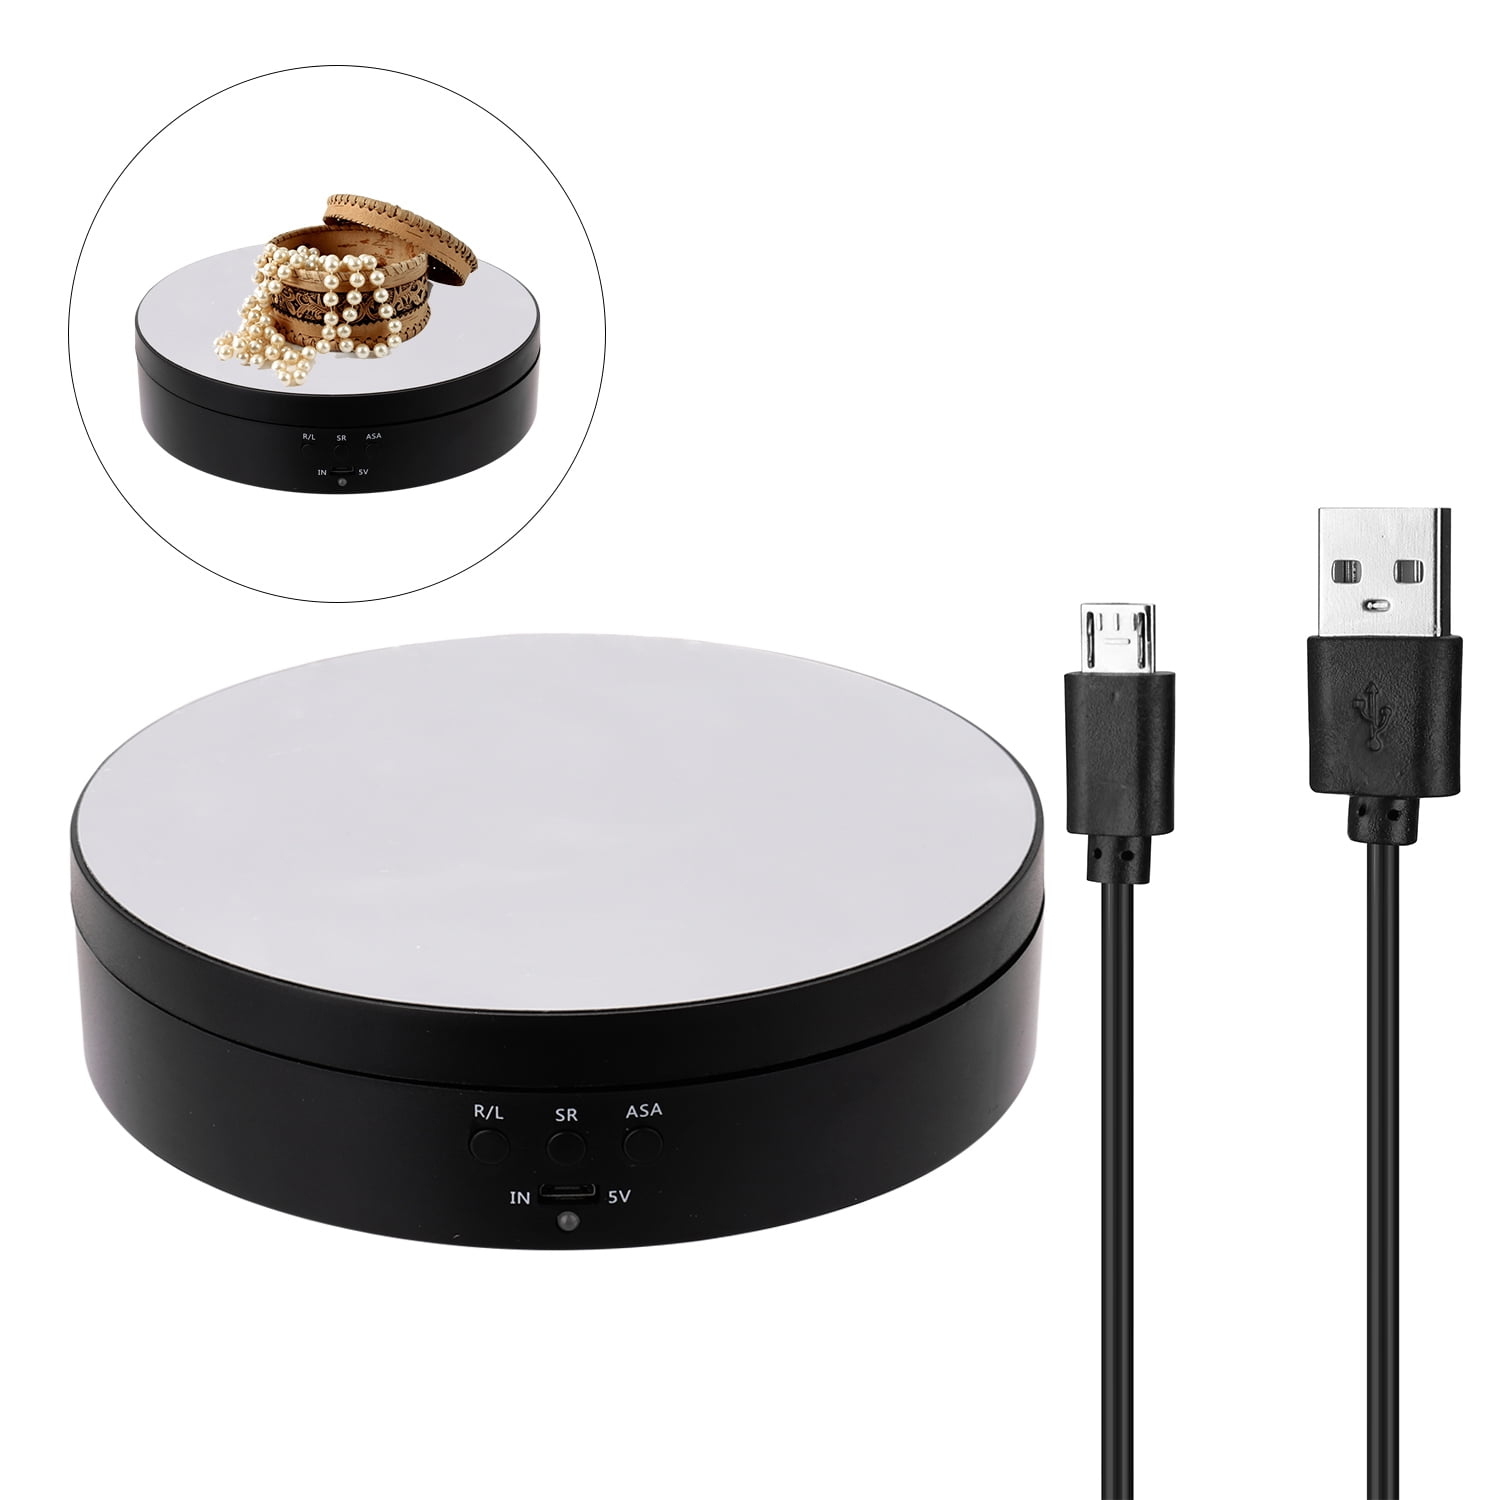 Anself 360 Degree Electric Rotating Turntable Display Stand for Video  Photography Props Speed Adjustable Display Turntable price in Saudi Arabia,  Saudi Arabia